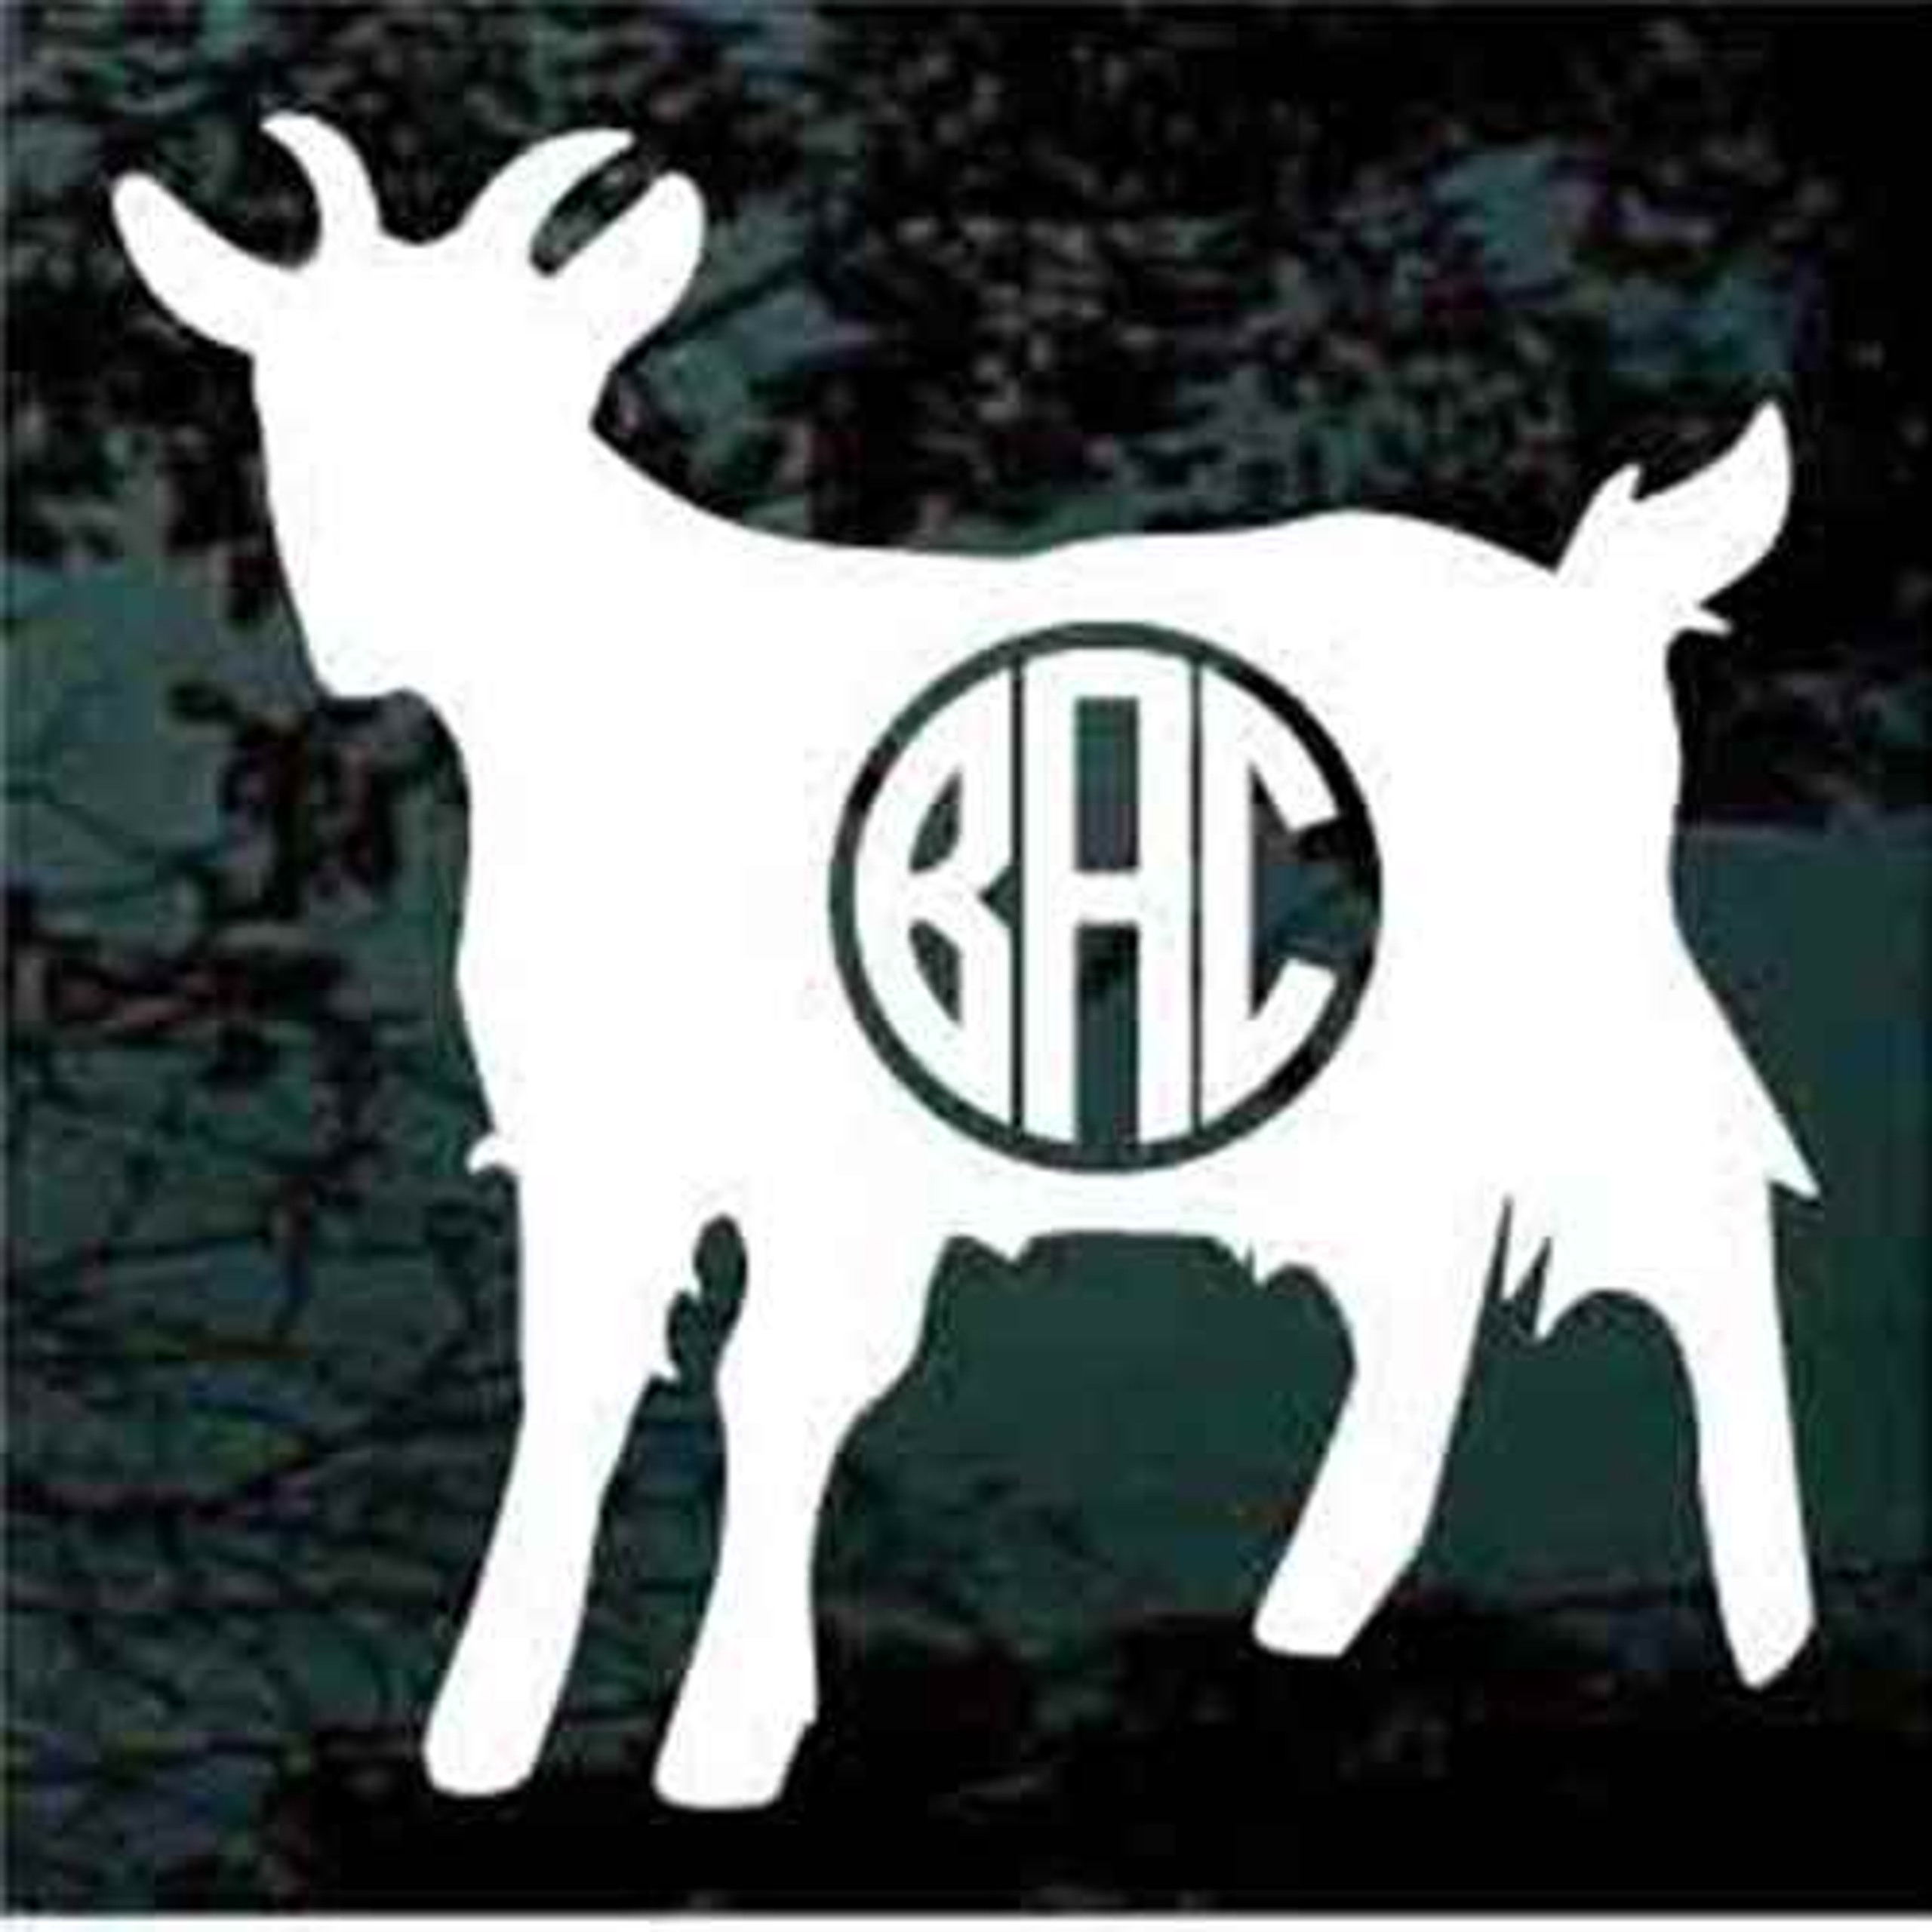 Goat Monogram Decals & Car Window Stickers | Decal Junky